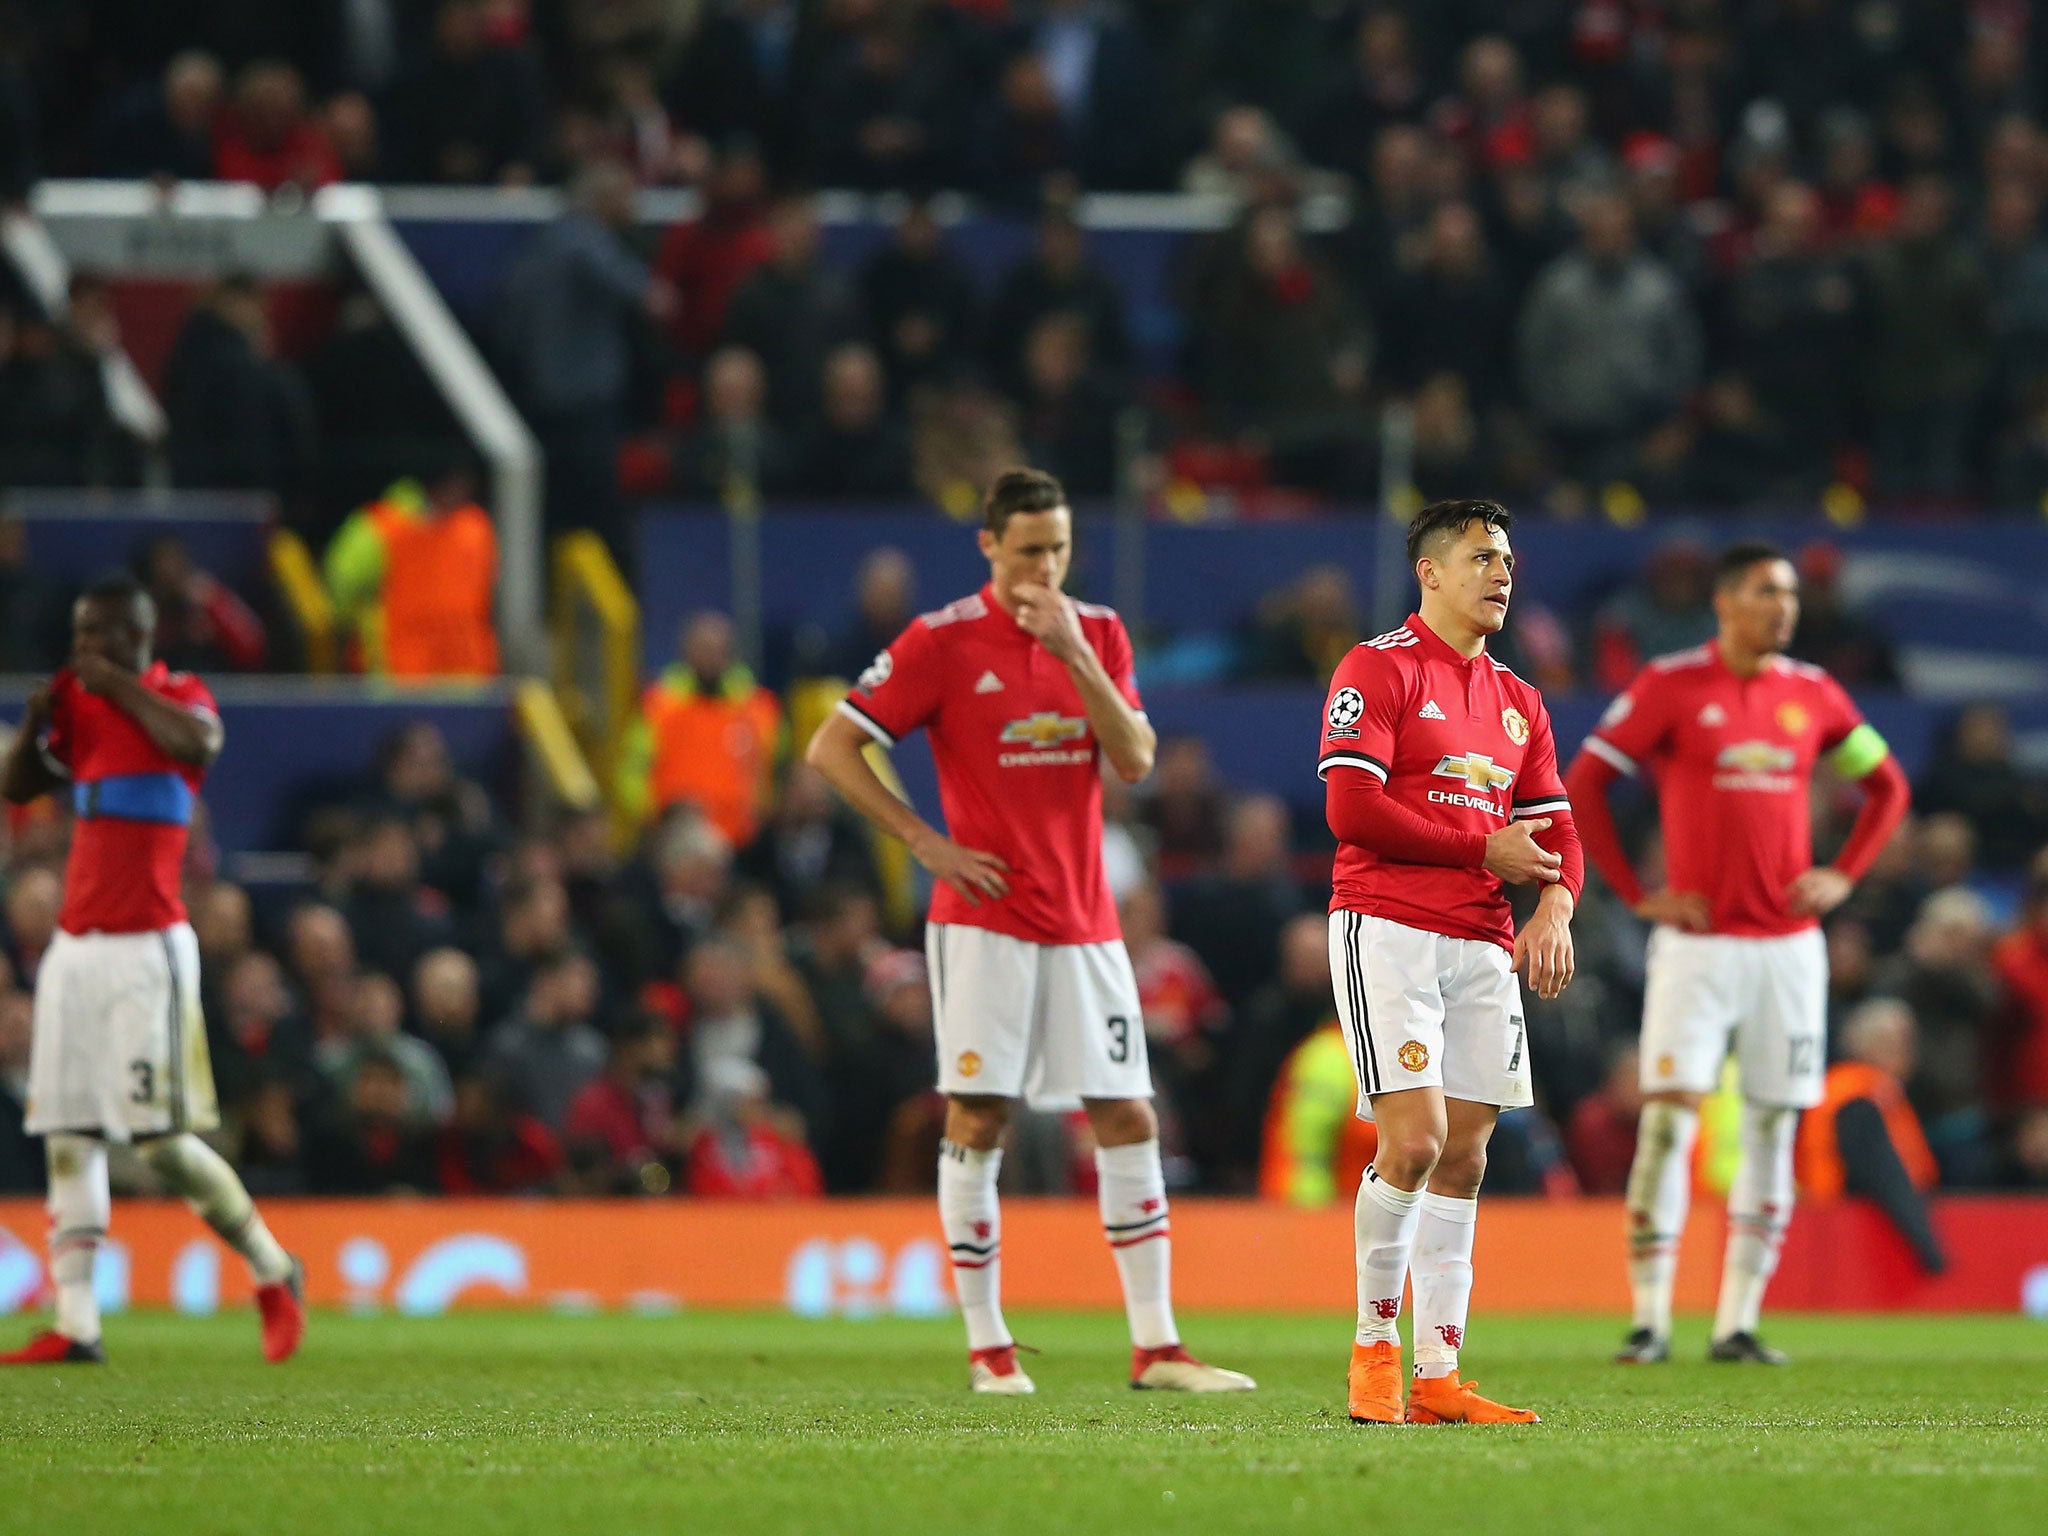 United’s players look on after their surprise defeat at Old Trafford